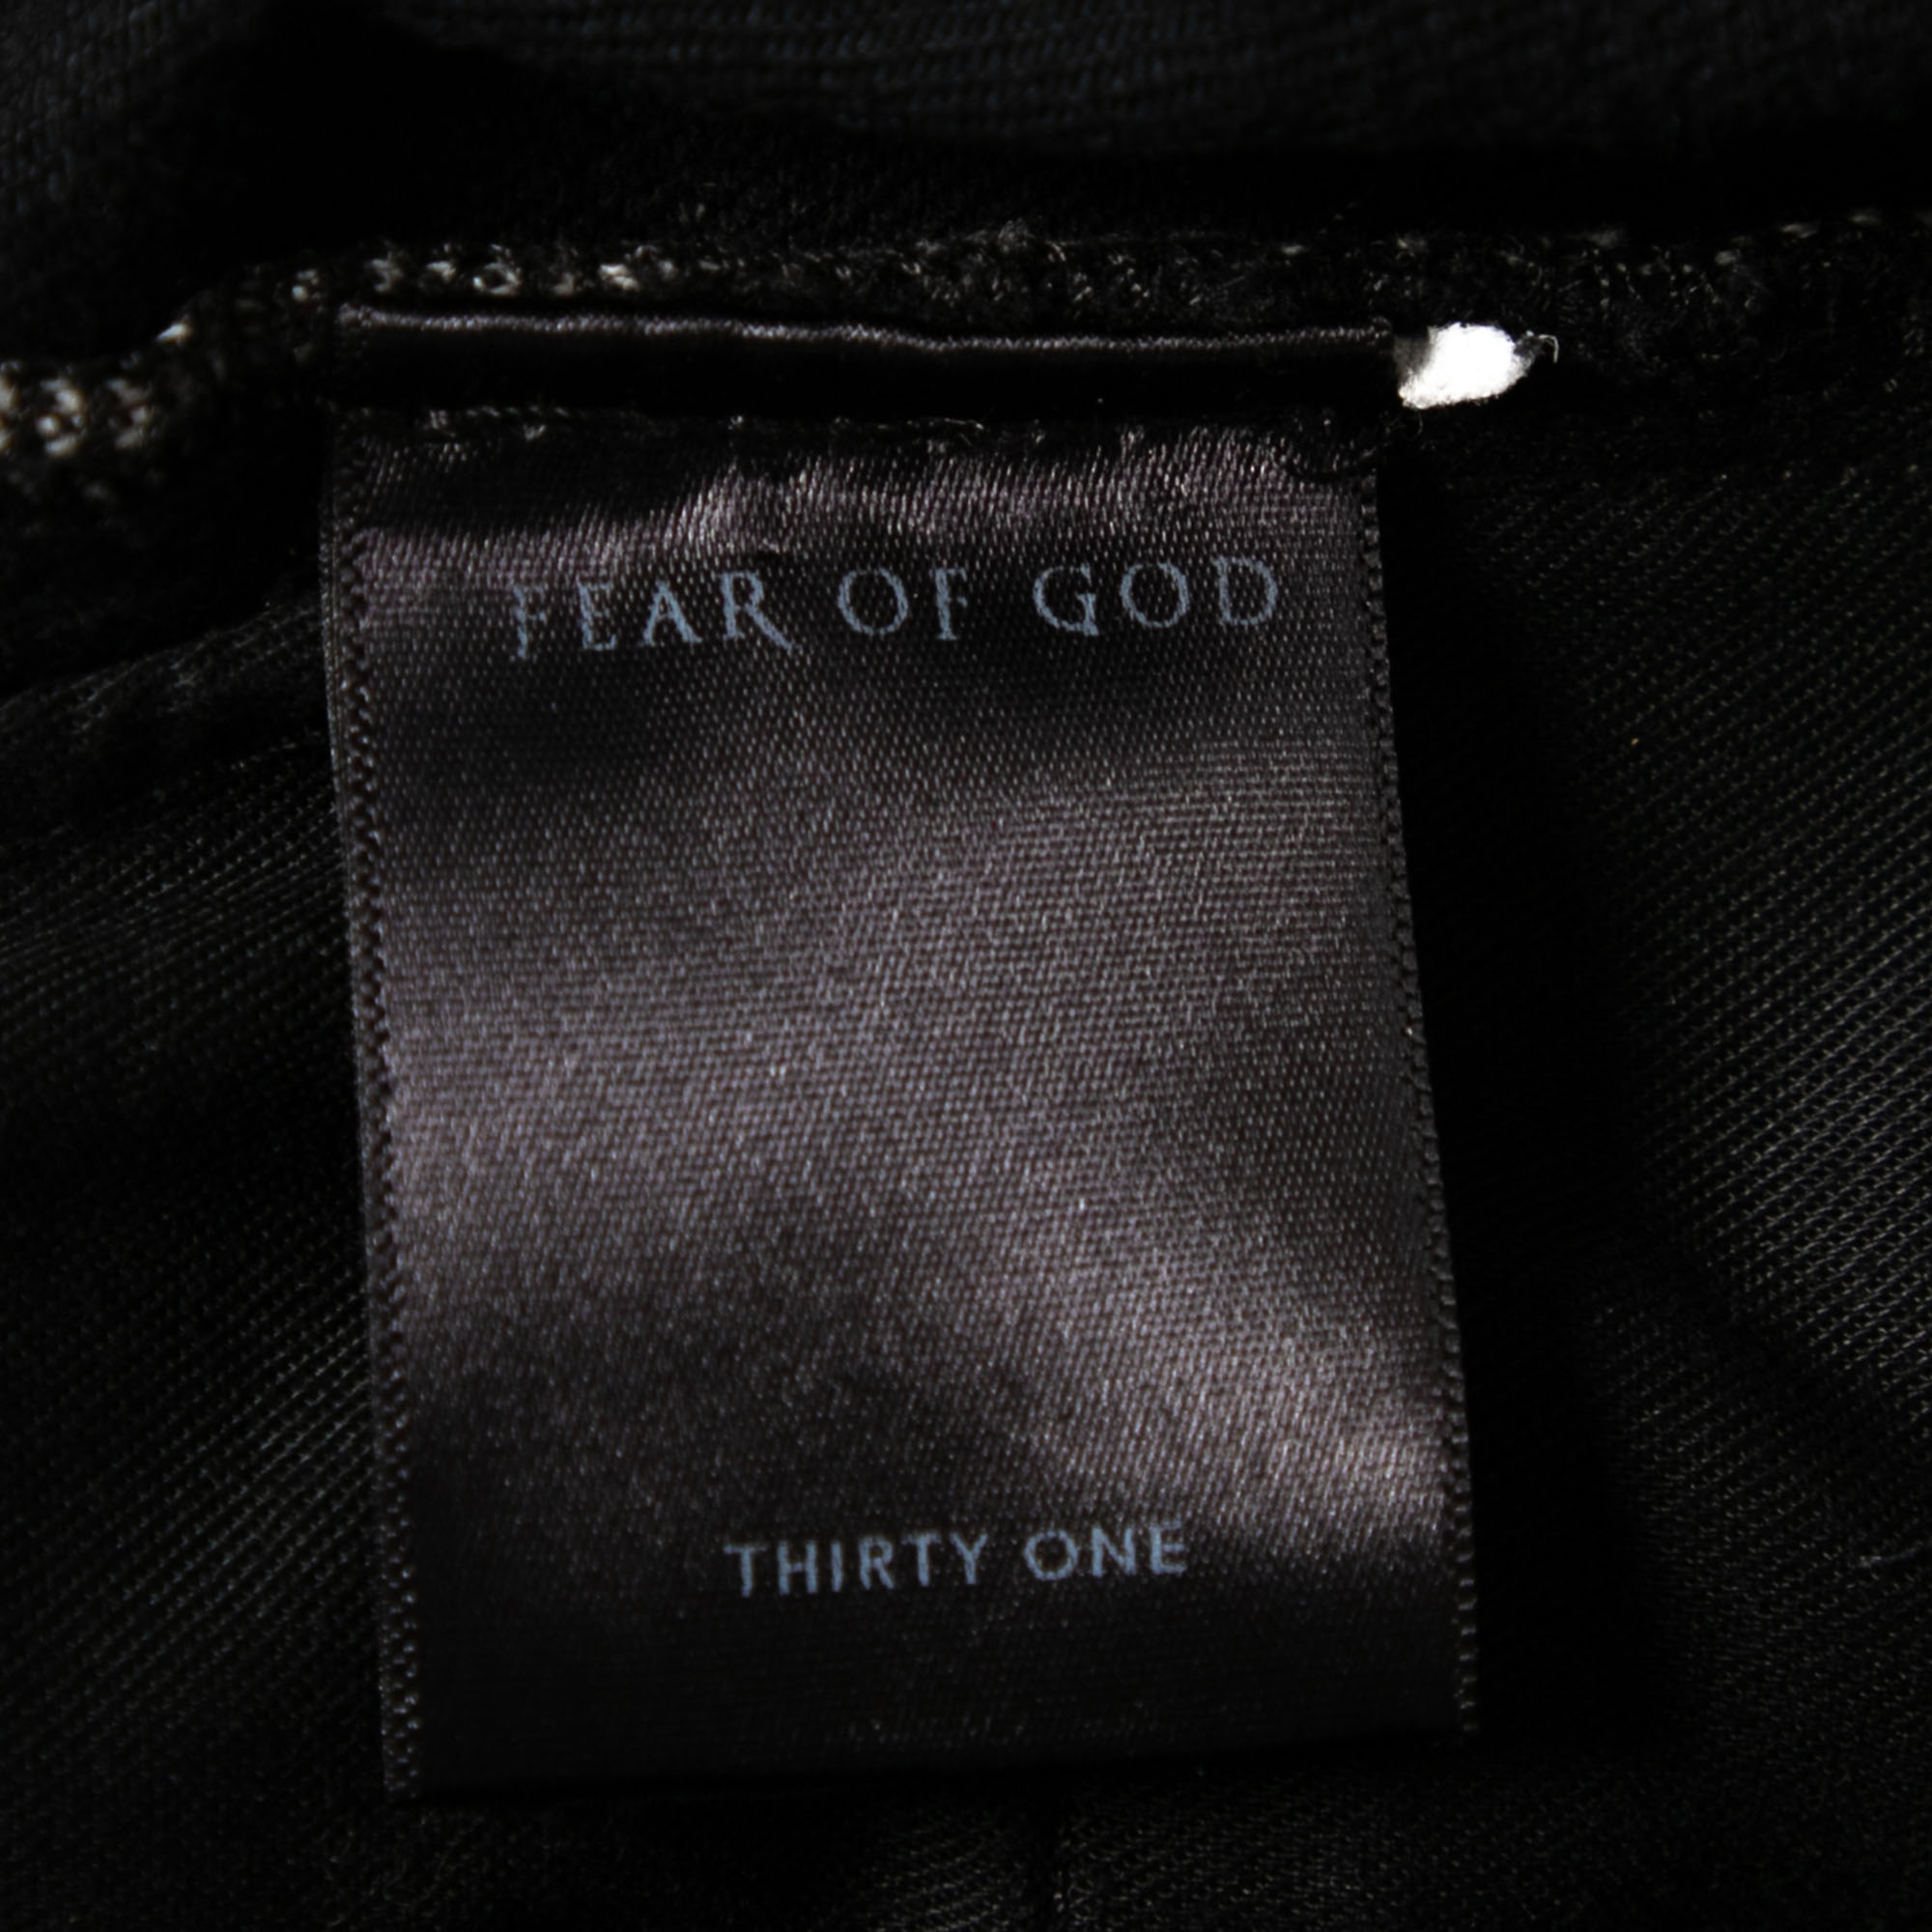 Fear Of God Fourth Collection Black Distressed Zipped Hem Jeans M